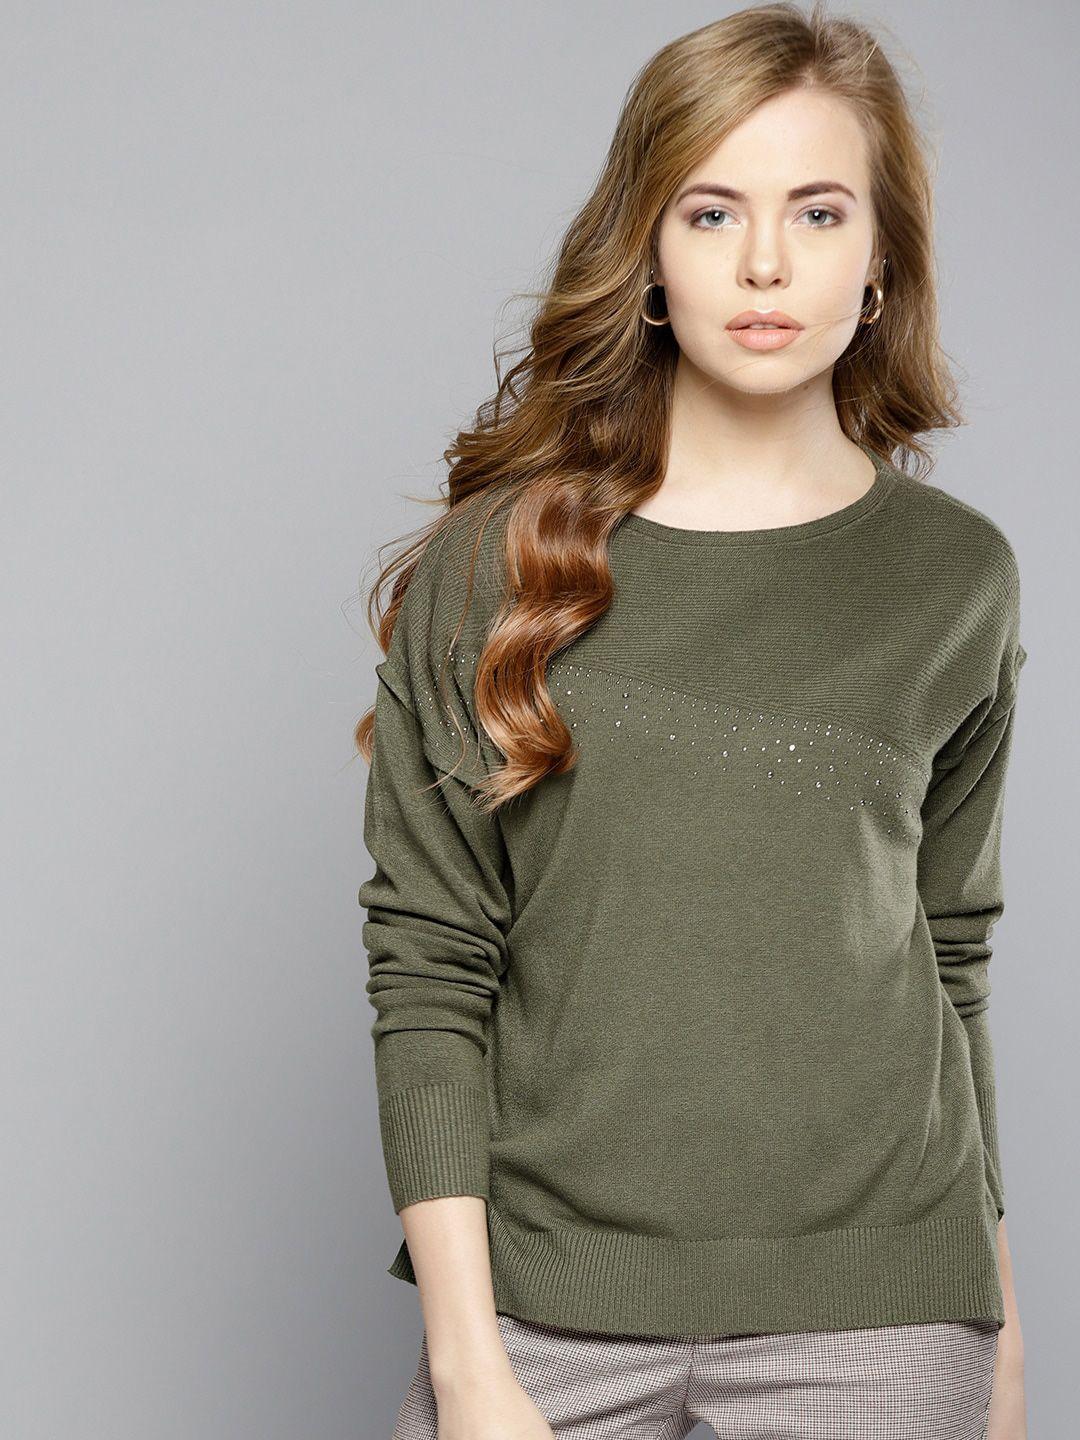 carlton london women pullover with embellished detail